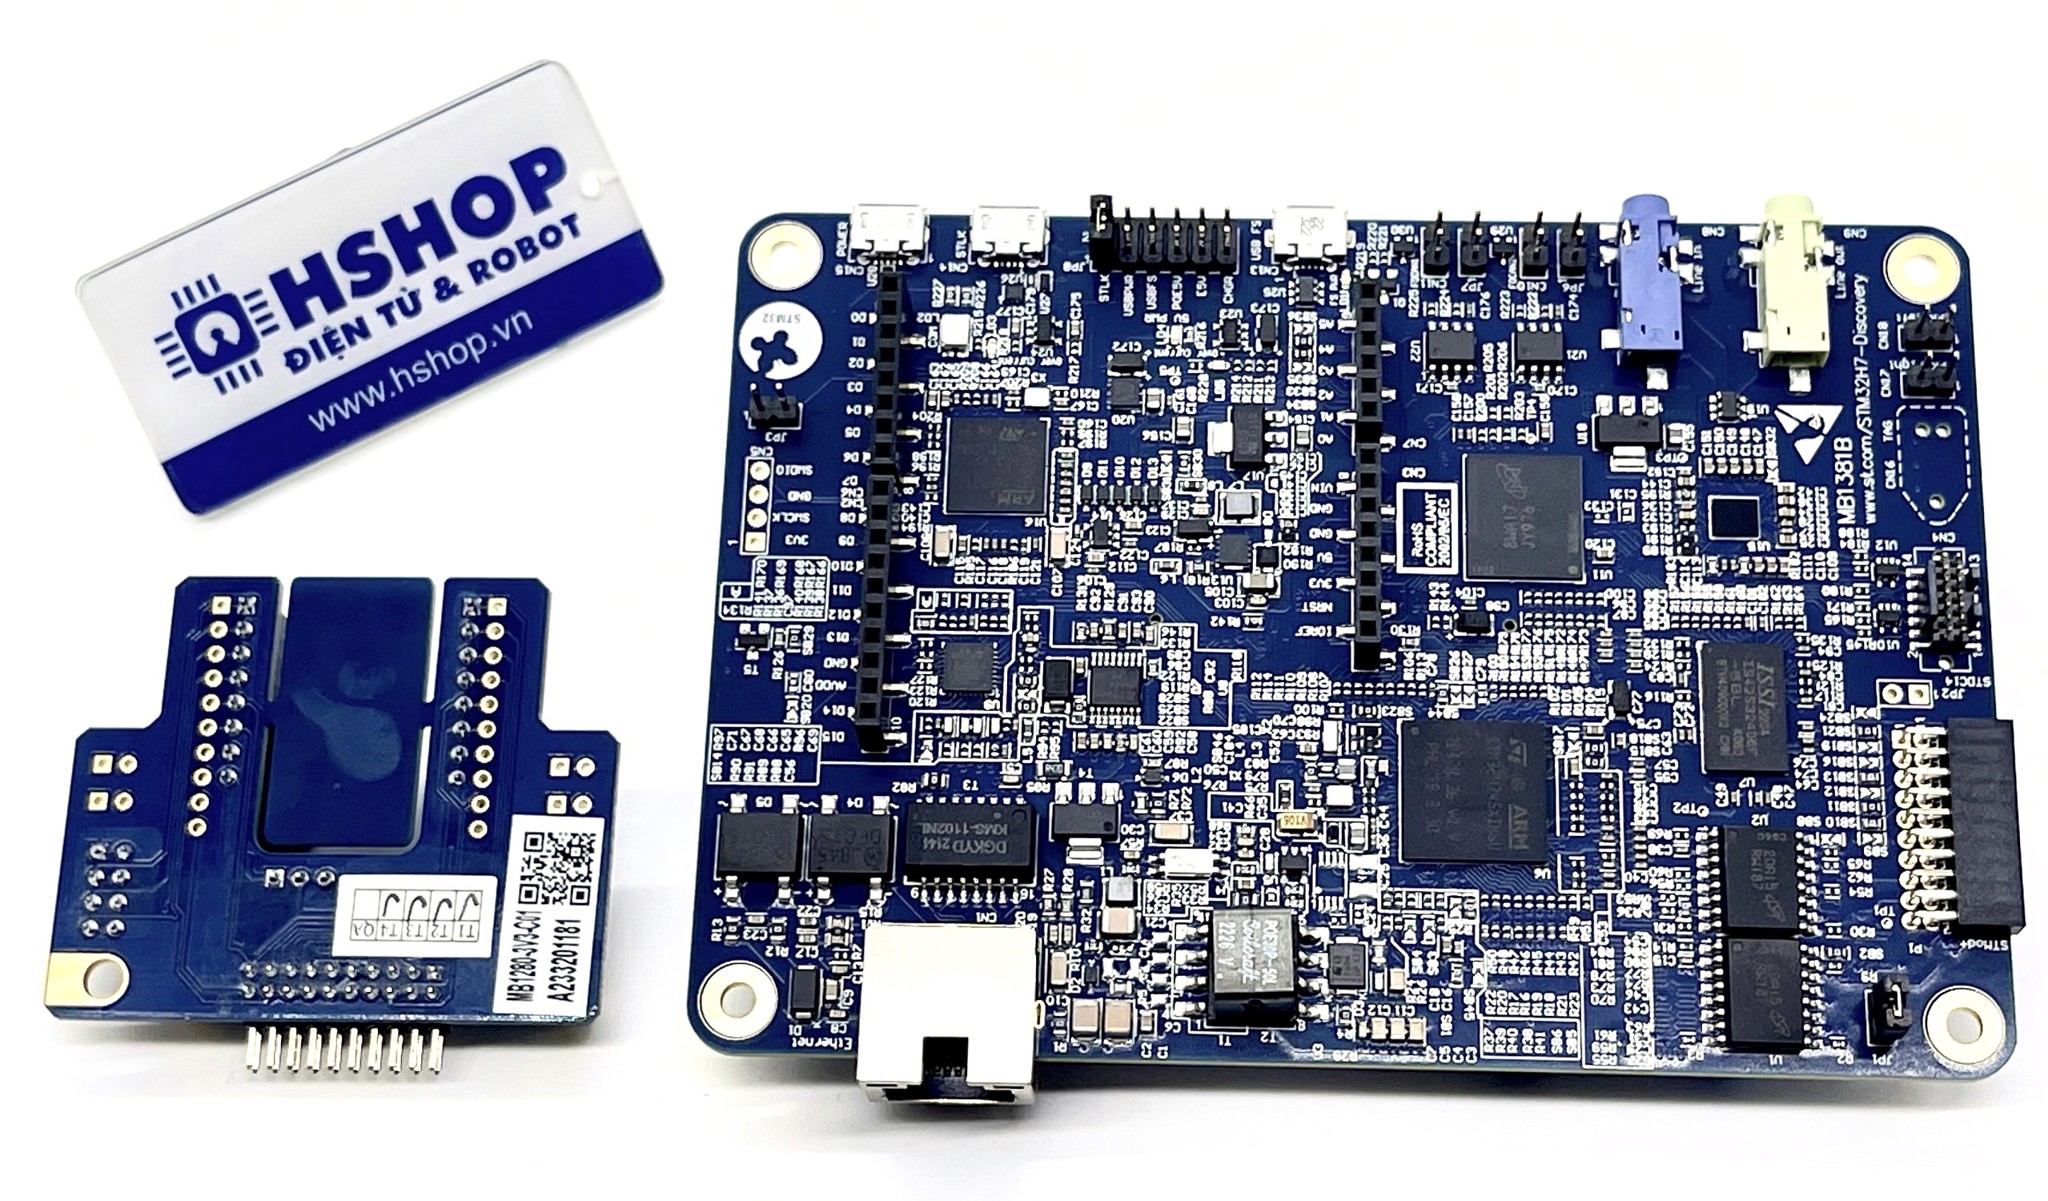 STM32H745I-DISCO Discovery kit with STM32H745XI MCU